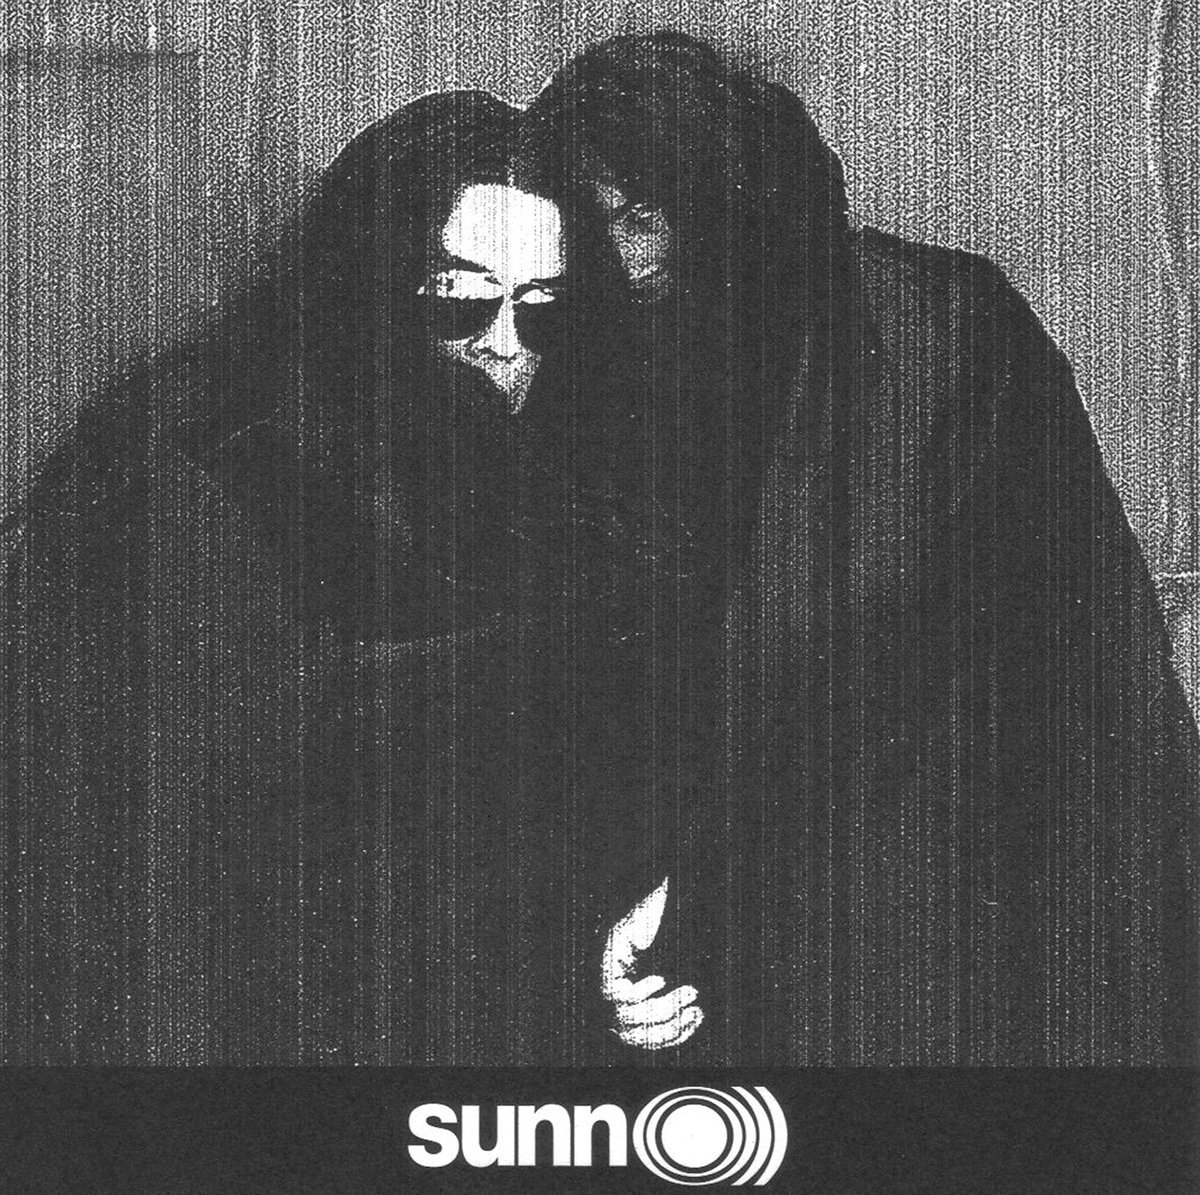 just announced & on sale NOW! Sunn O))) with very special guests Jesse Sykes and Phil Wandscher 📷 📷 bit.ly/45SIJ1E